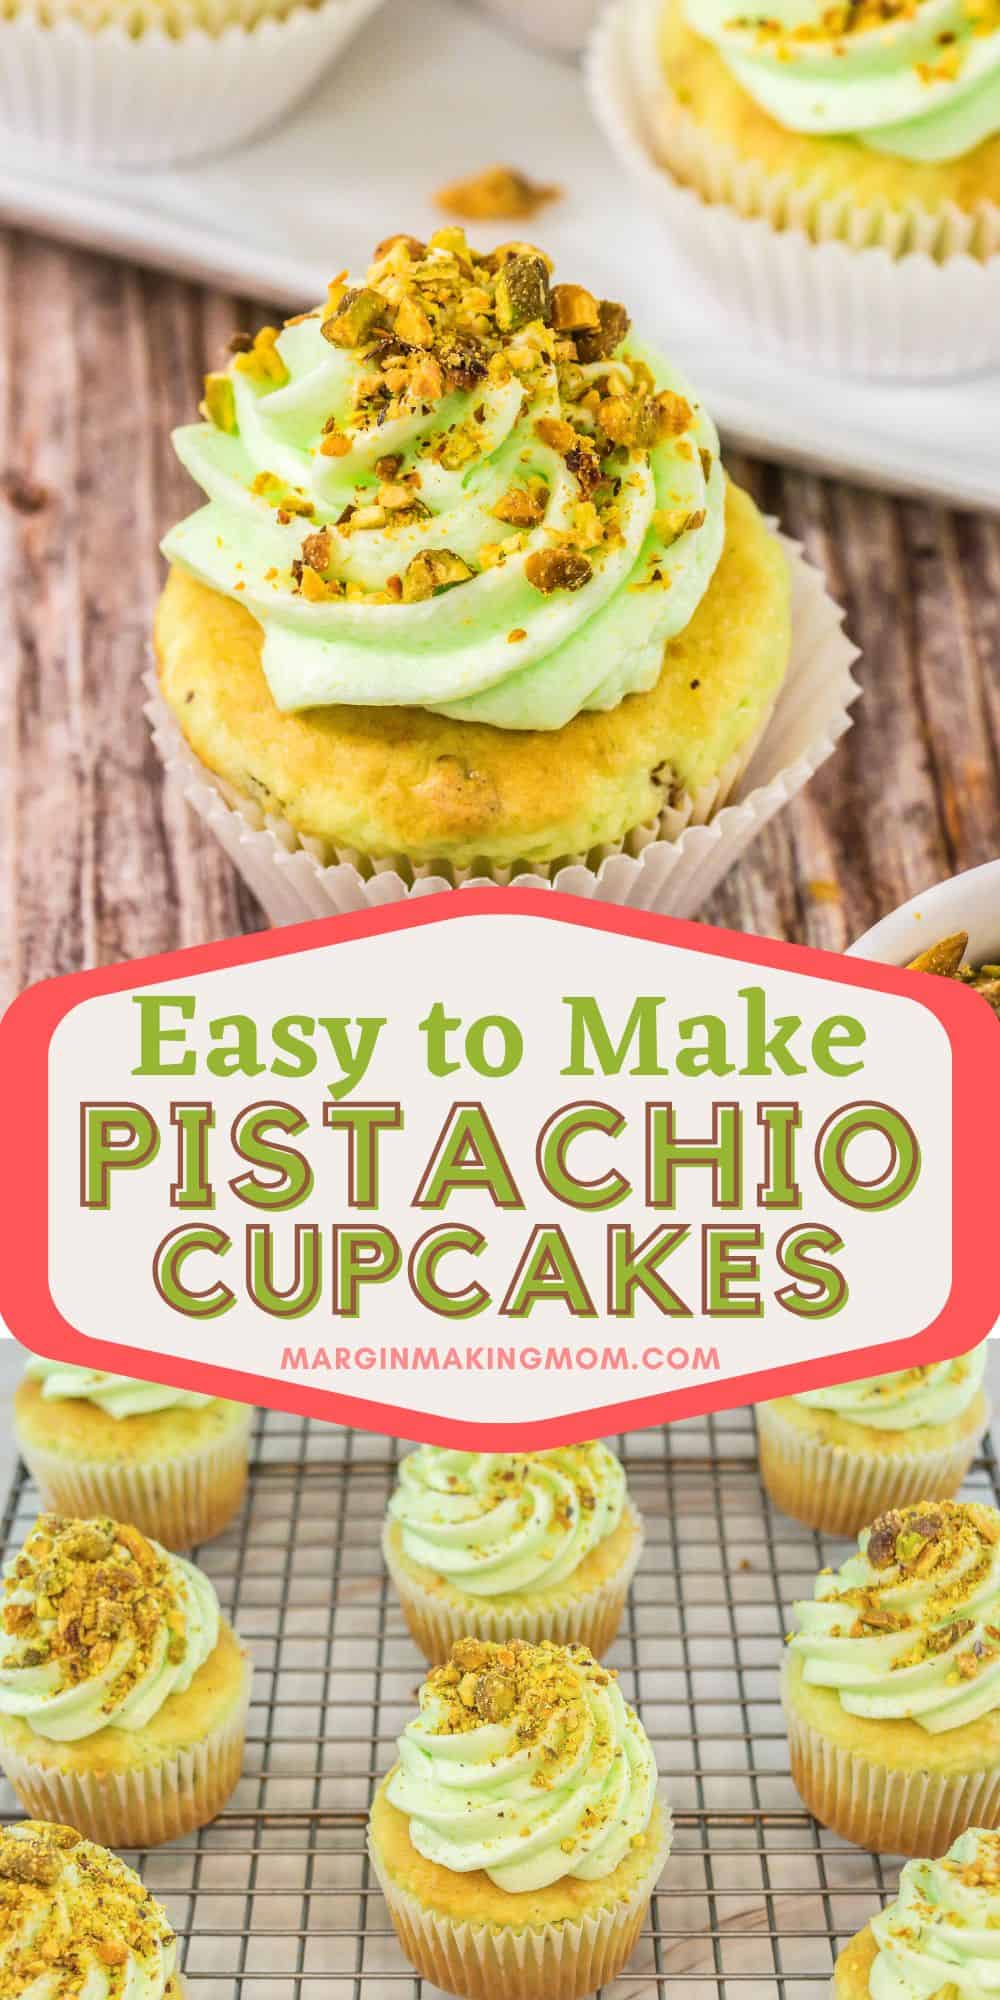 two photos, each showing homemade pistachio cupcakes made with cake mix and pudding mix, topped with pistachio buttercream.